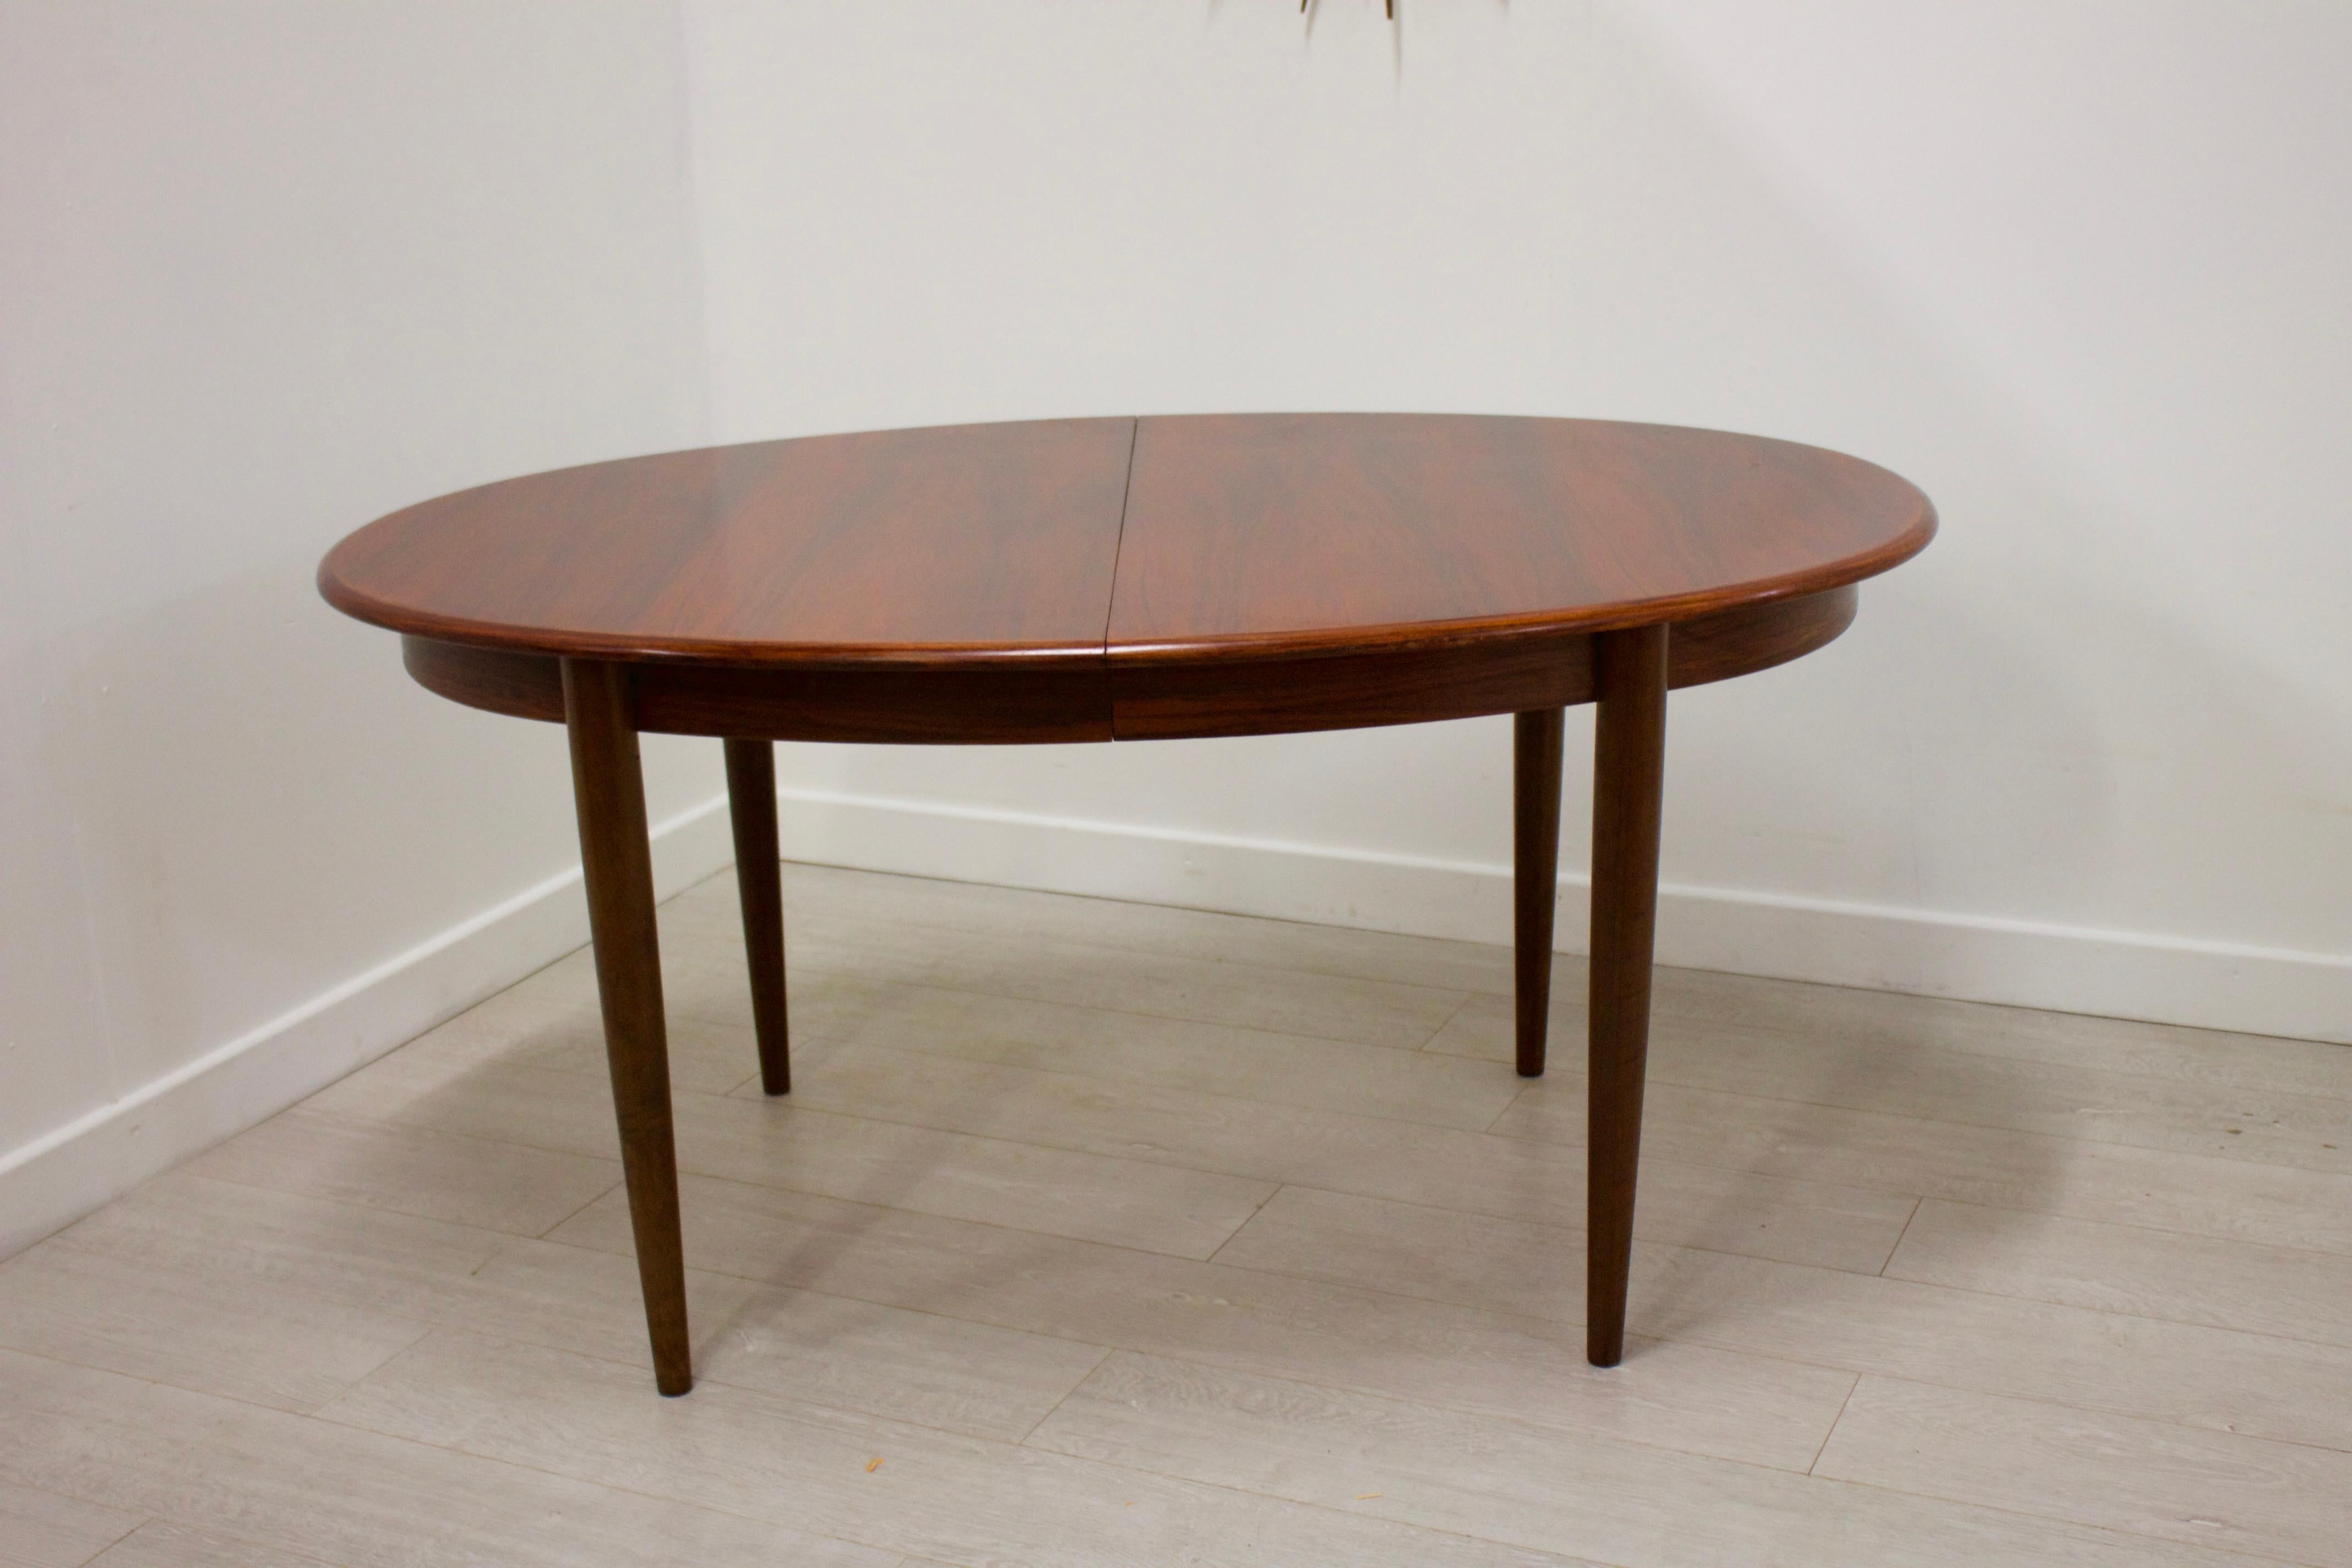 20th Century Midcentury Danish Rosewood Extending Table by Gudme Møbelfabrik For Sale